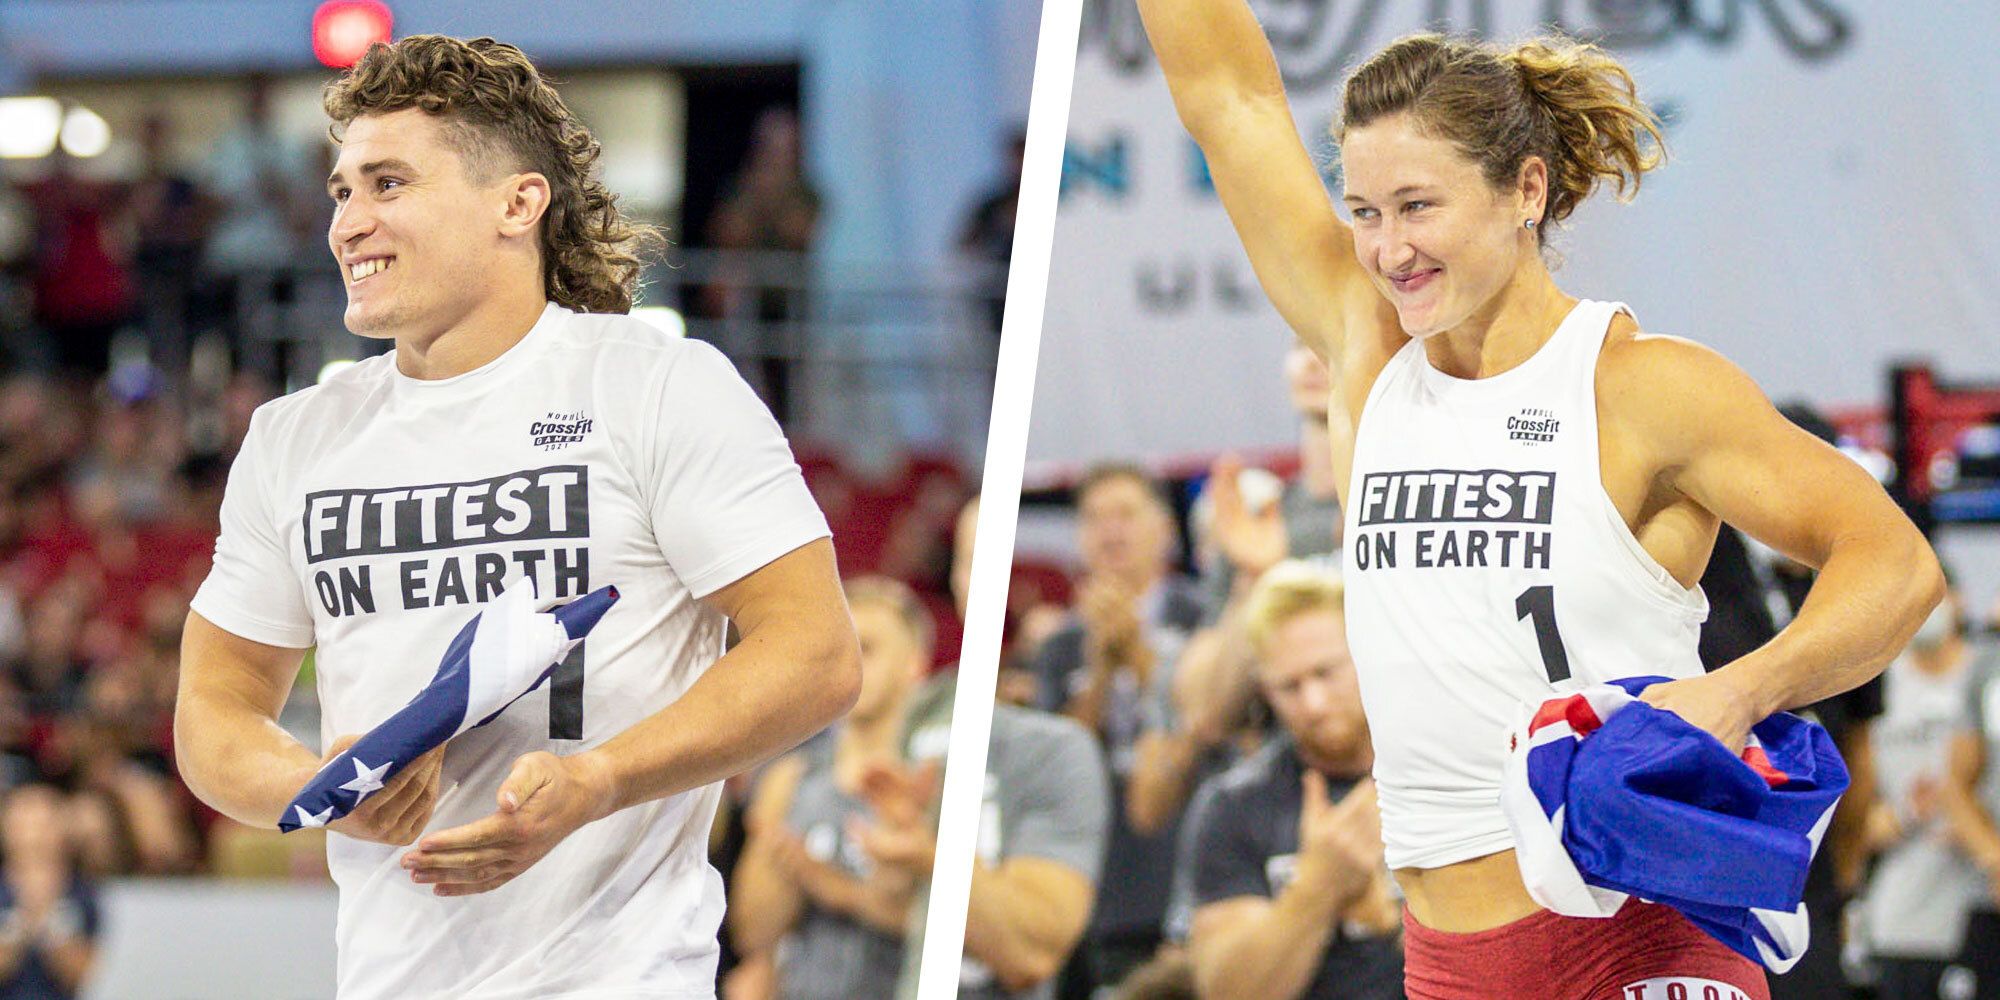 2021 CrossFit Games: Tia-Clair Toomey-Orr and Medeiros Win